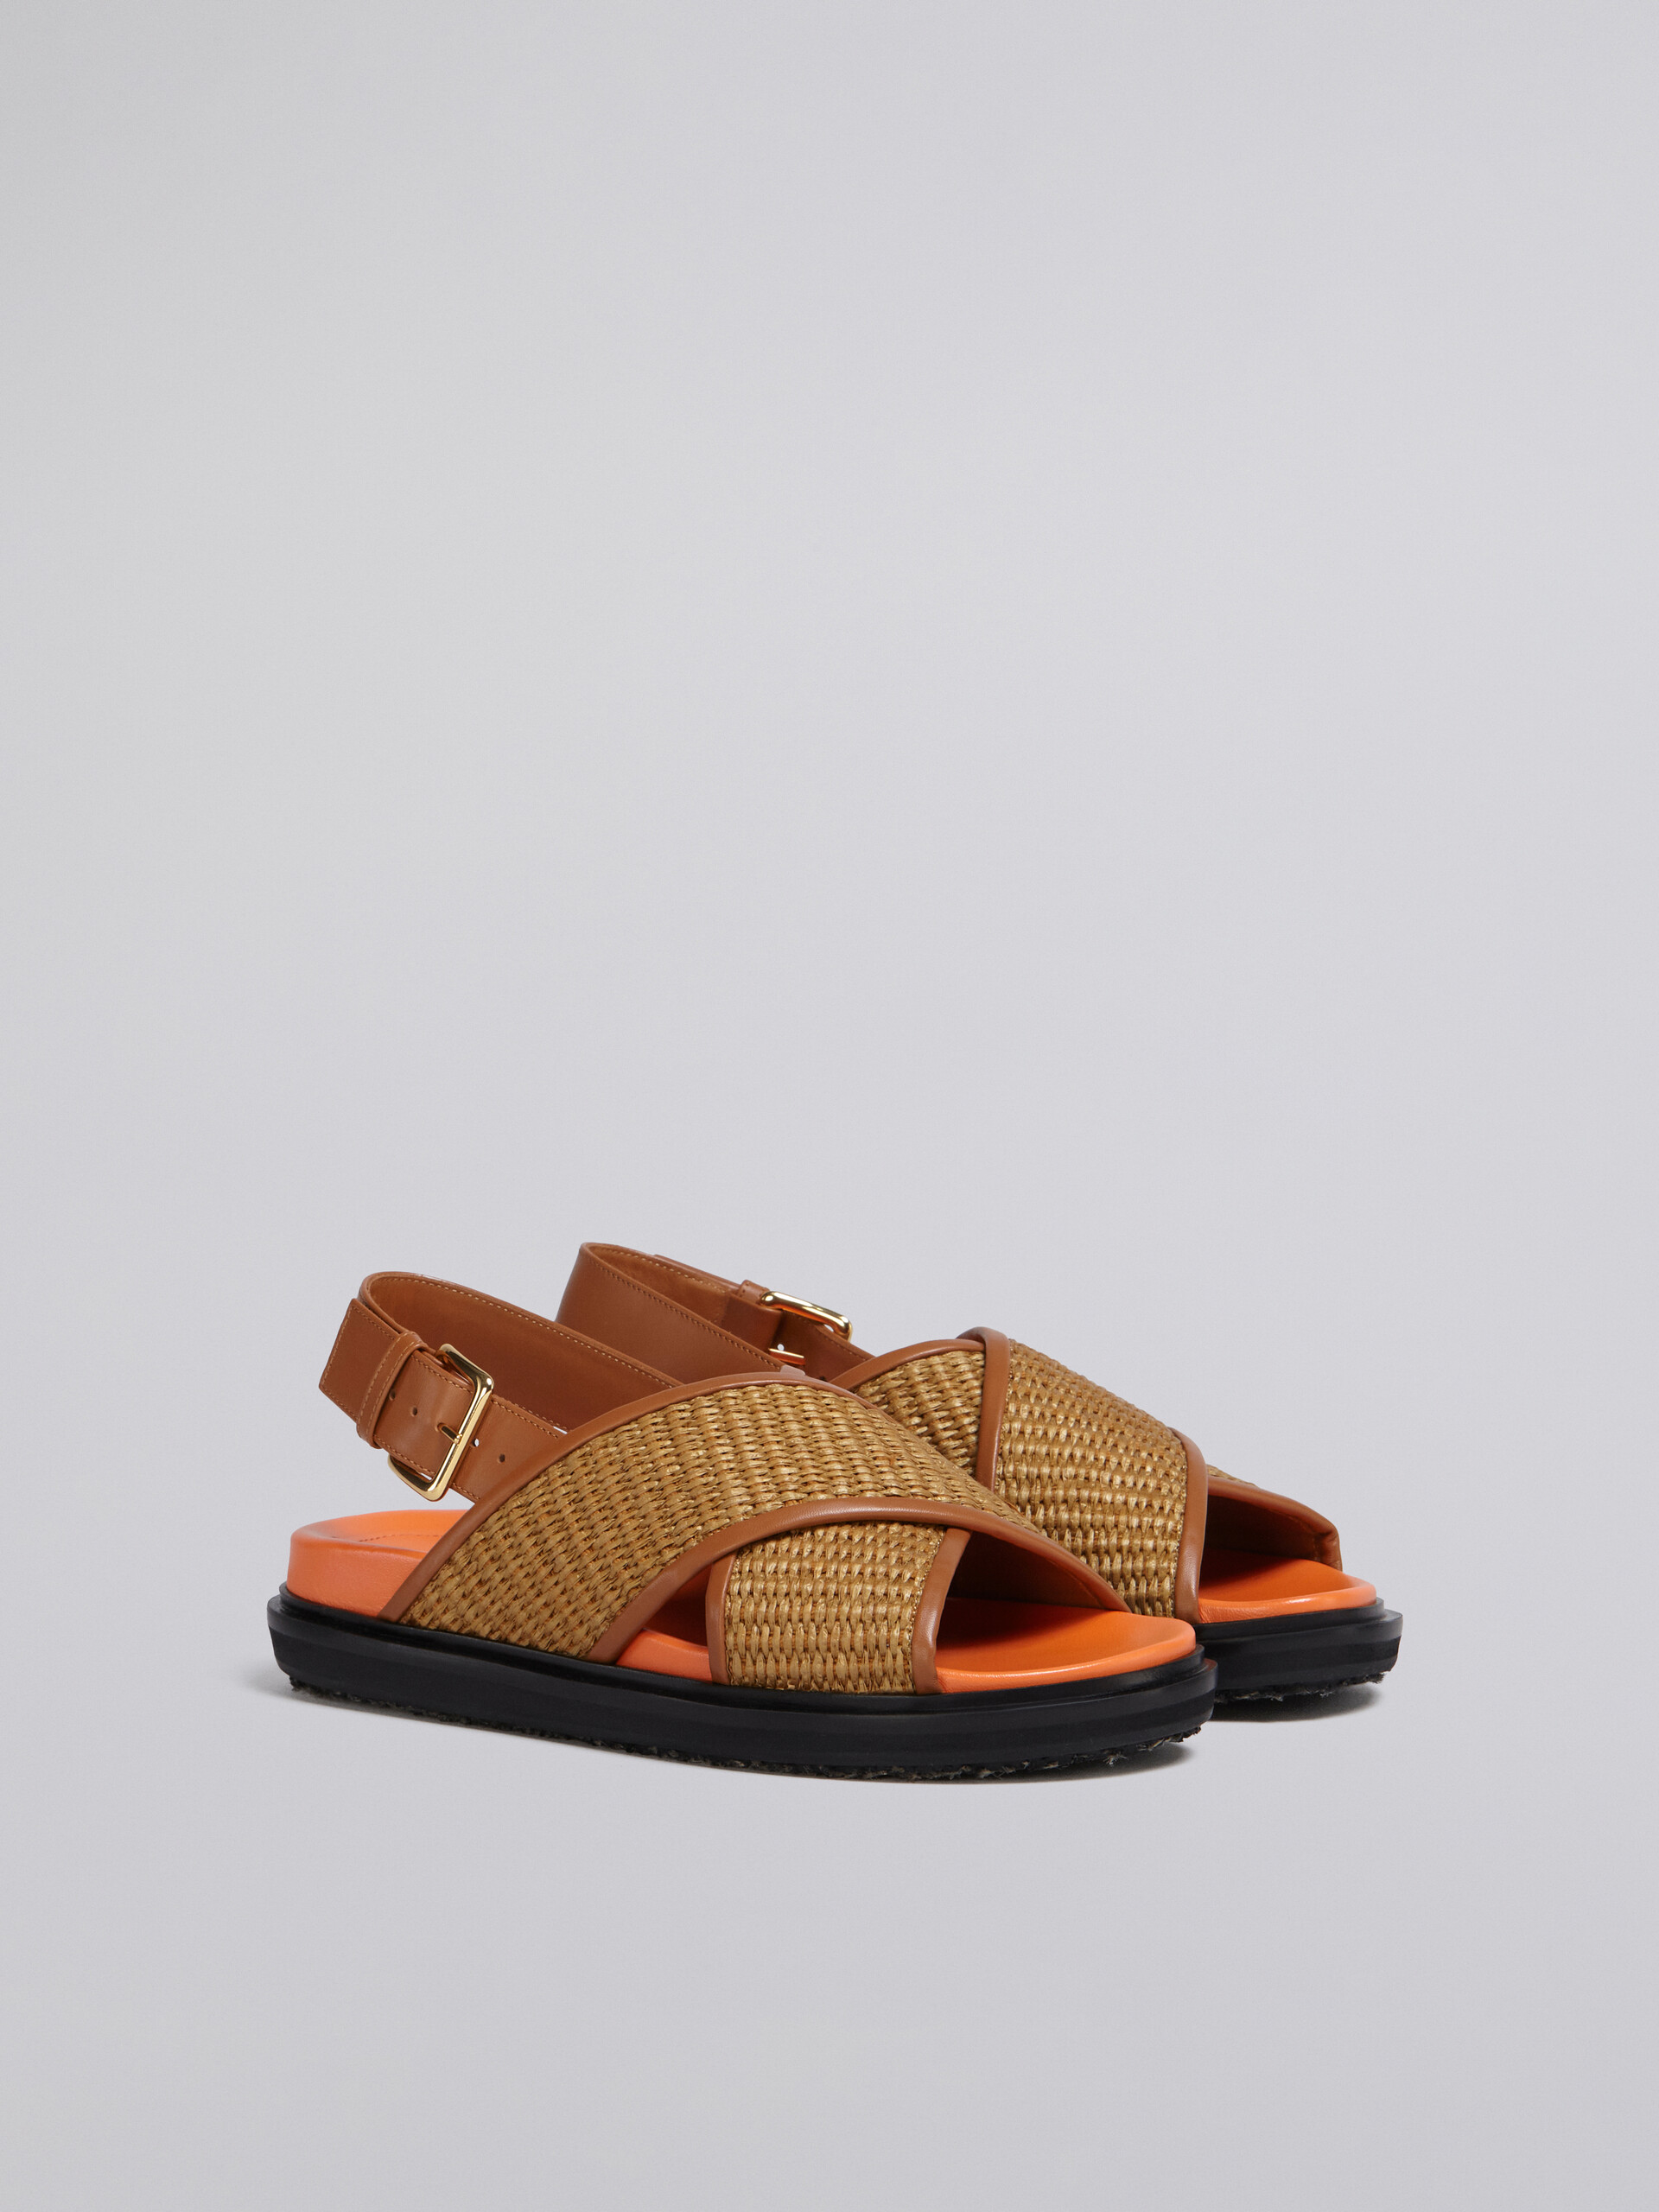 Brown raffia and leather fussbett - Sandals - Image 2